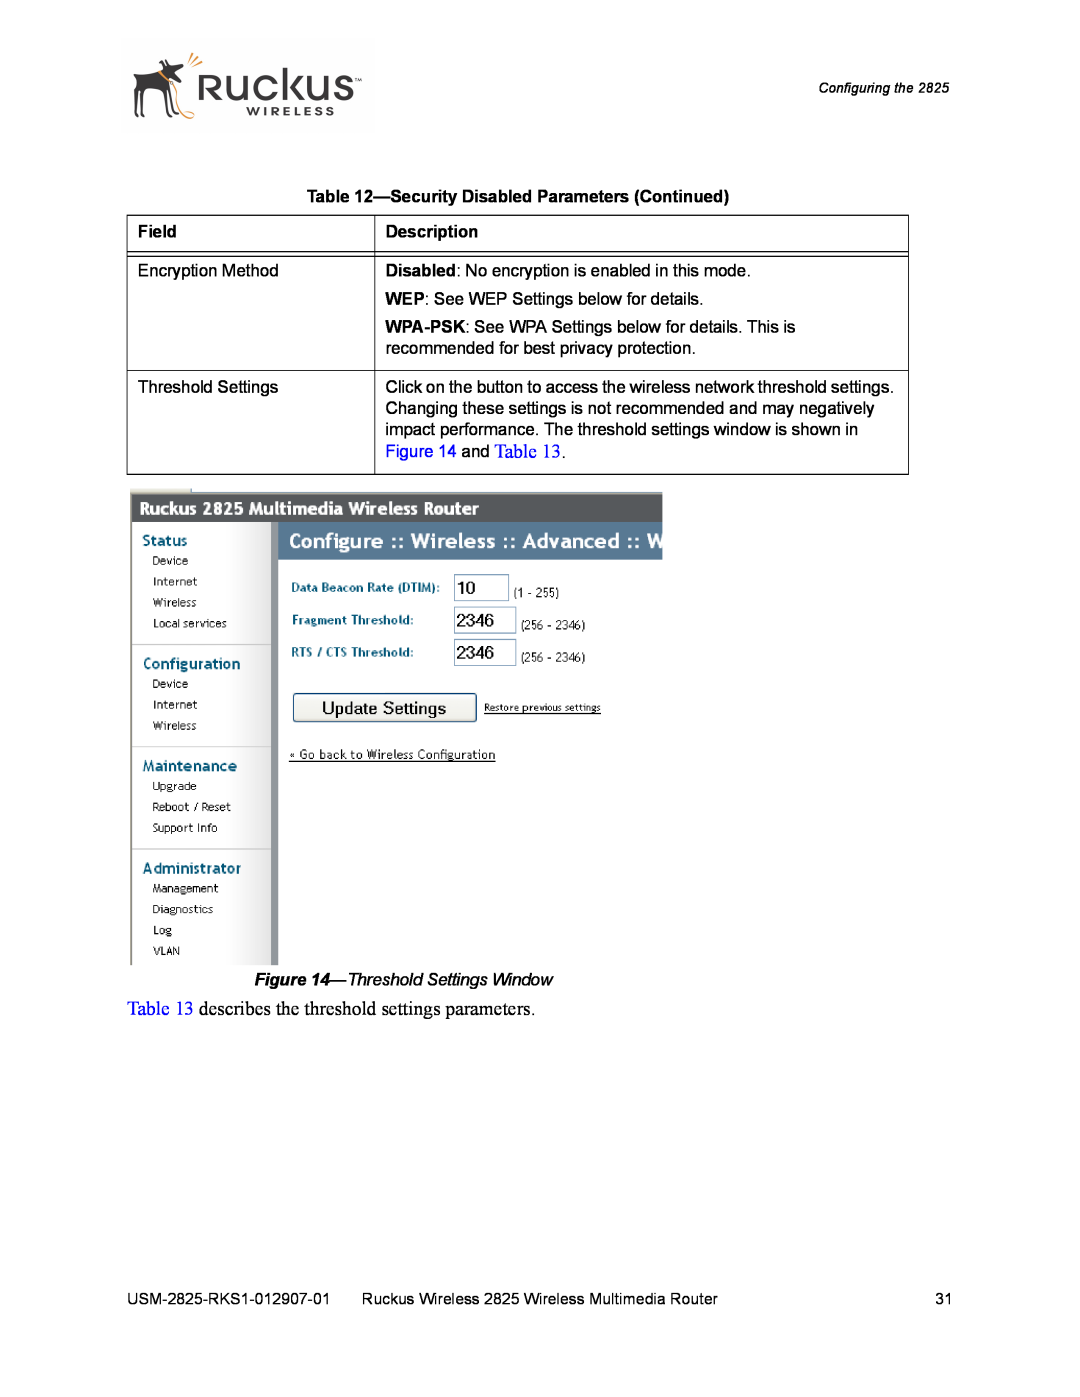 Ruckus Wireless 2111 describes the threshold settings parameters, Security Disabled Parameters Continued, Field, and Table 